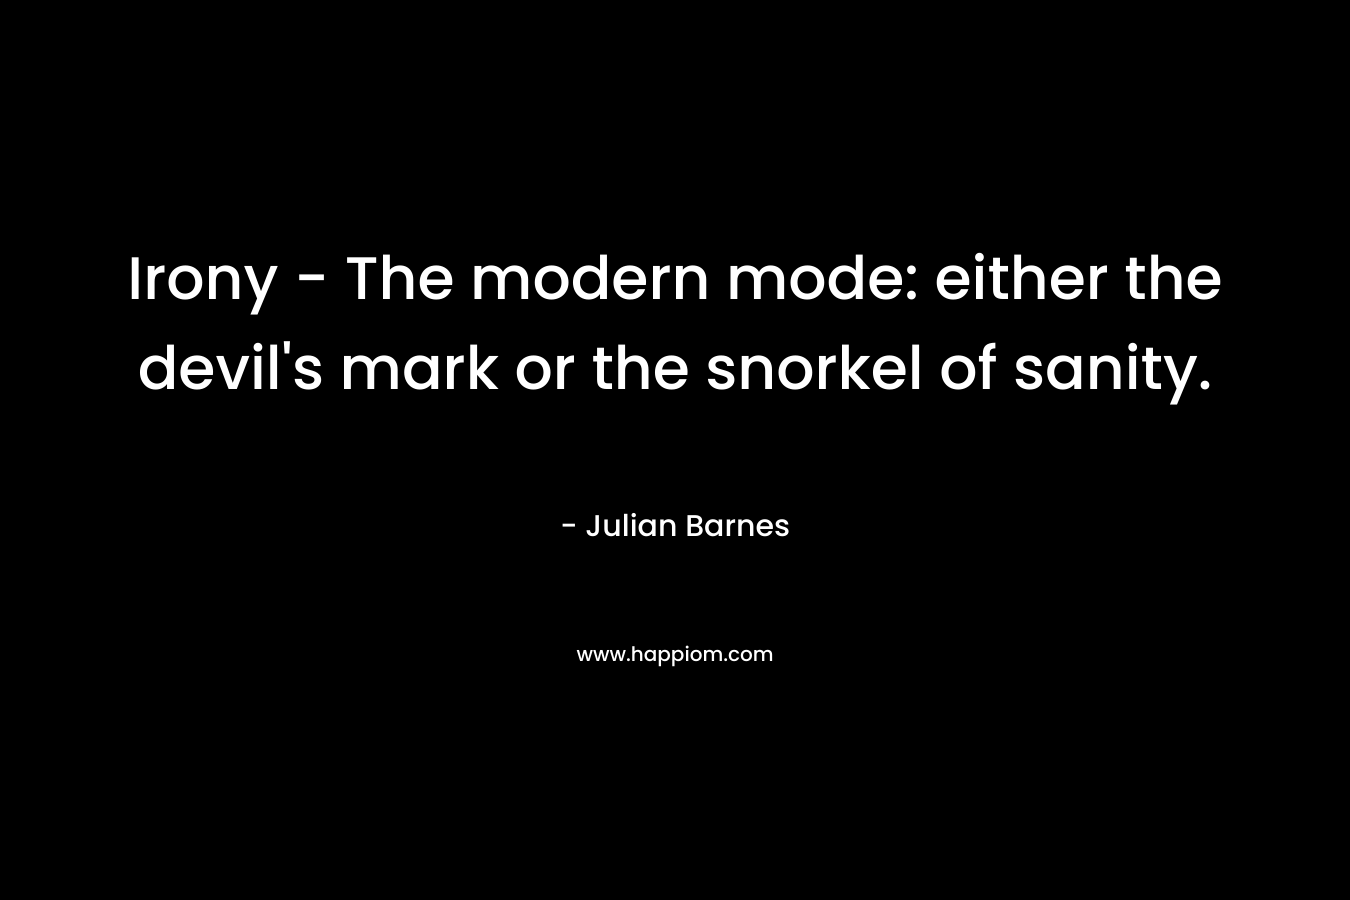 Irony – The modern mode: either the devil’s mark or the snorkel of sanity. – Julian Barnes